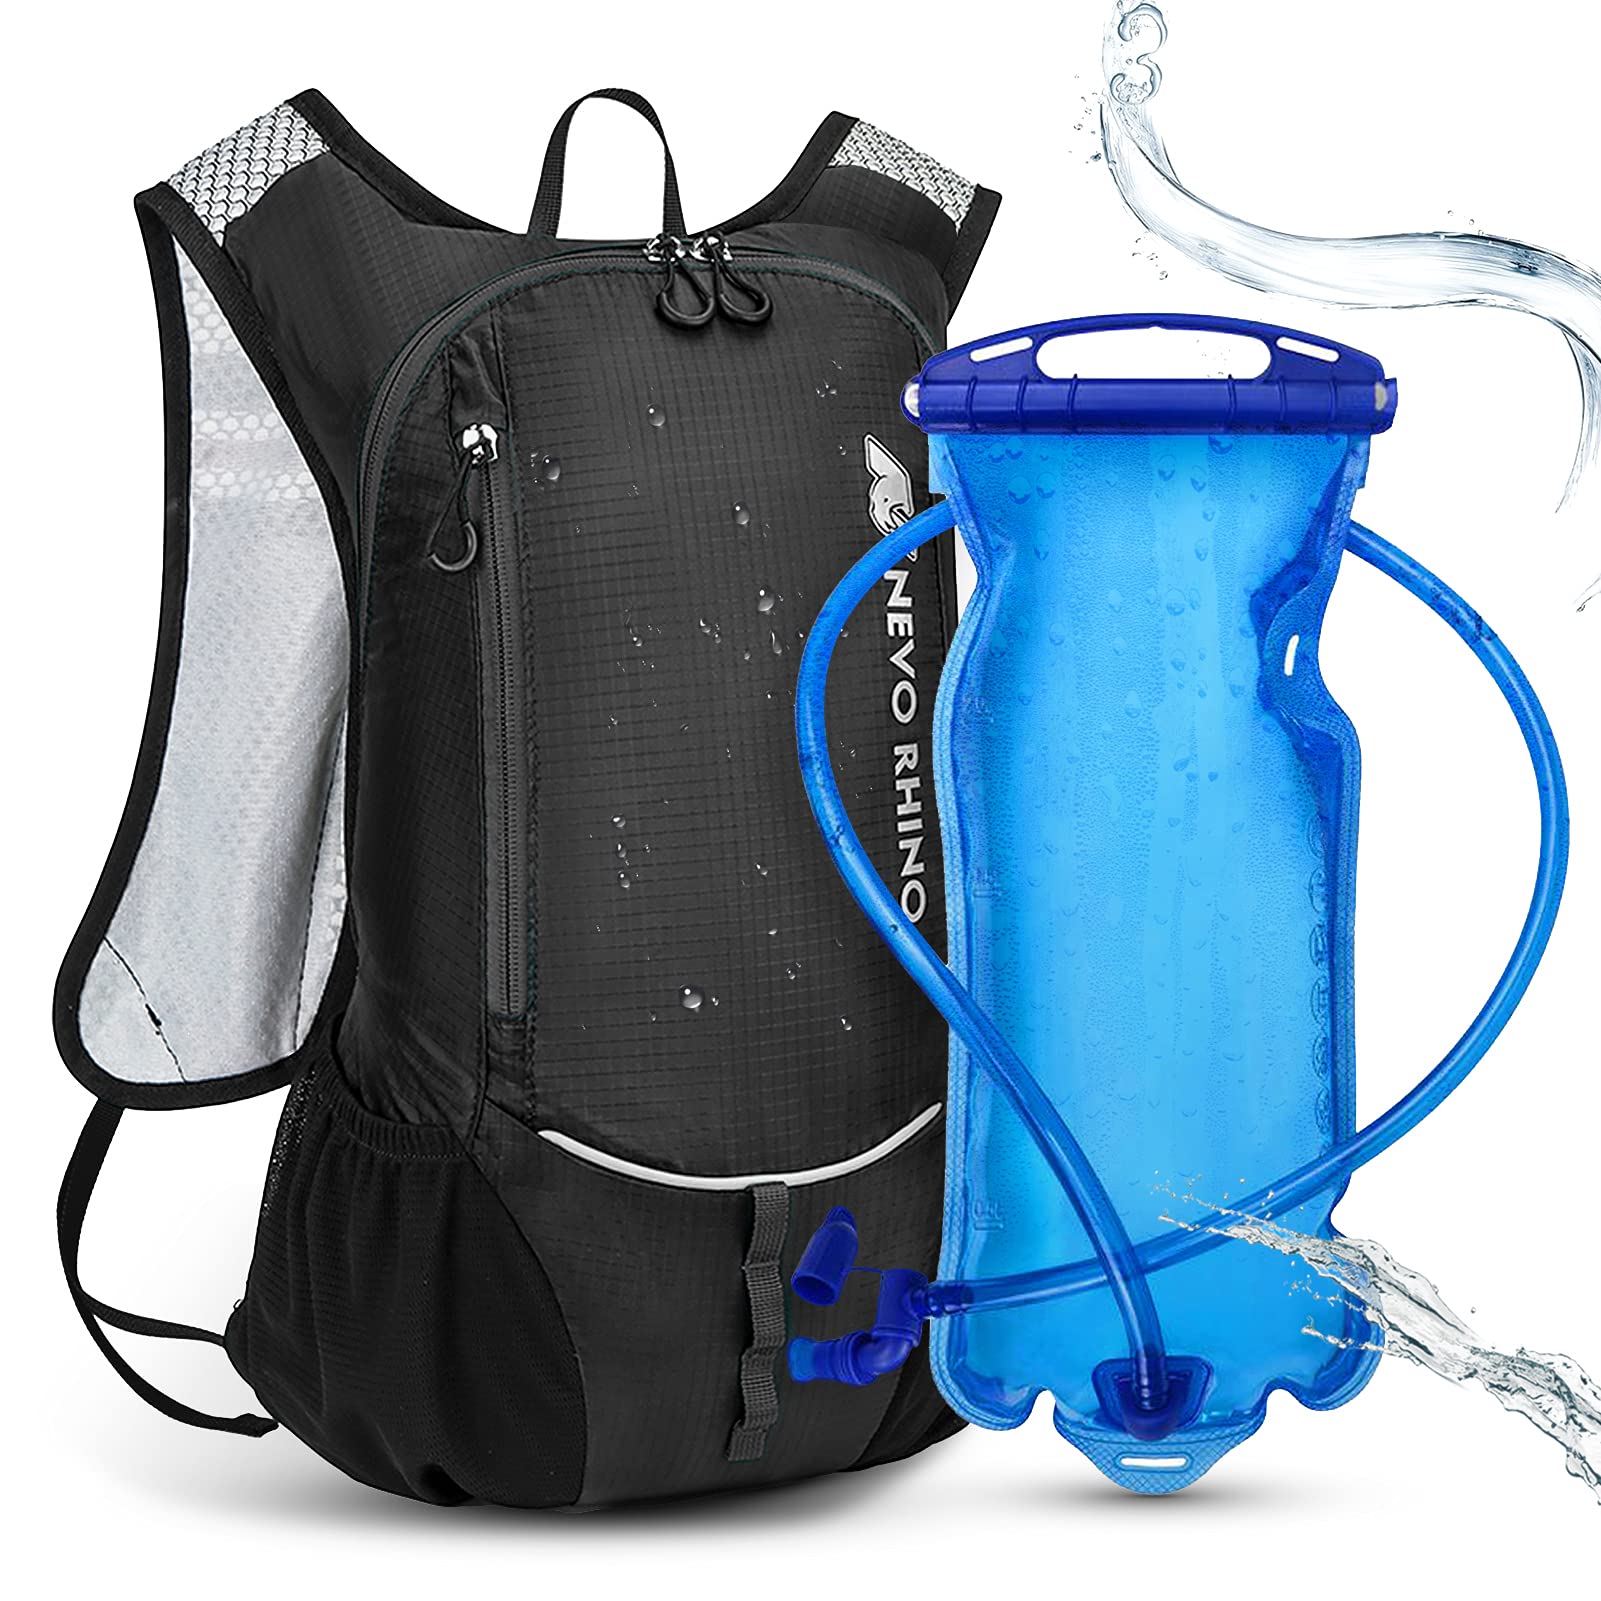 8OZ Lightweight Waterproof Water Backpack for Cycling/Hiking/Running/Camping/Raves/Festival NEVO Rhino Hydration Pack Backpack 2L Bladder BPA Free 